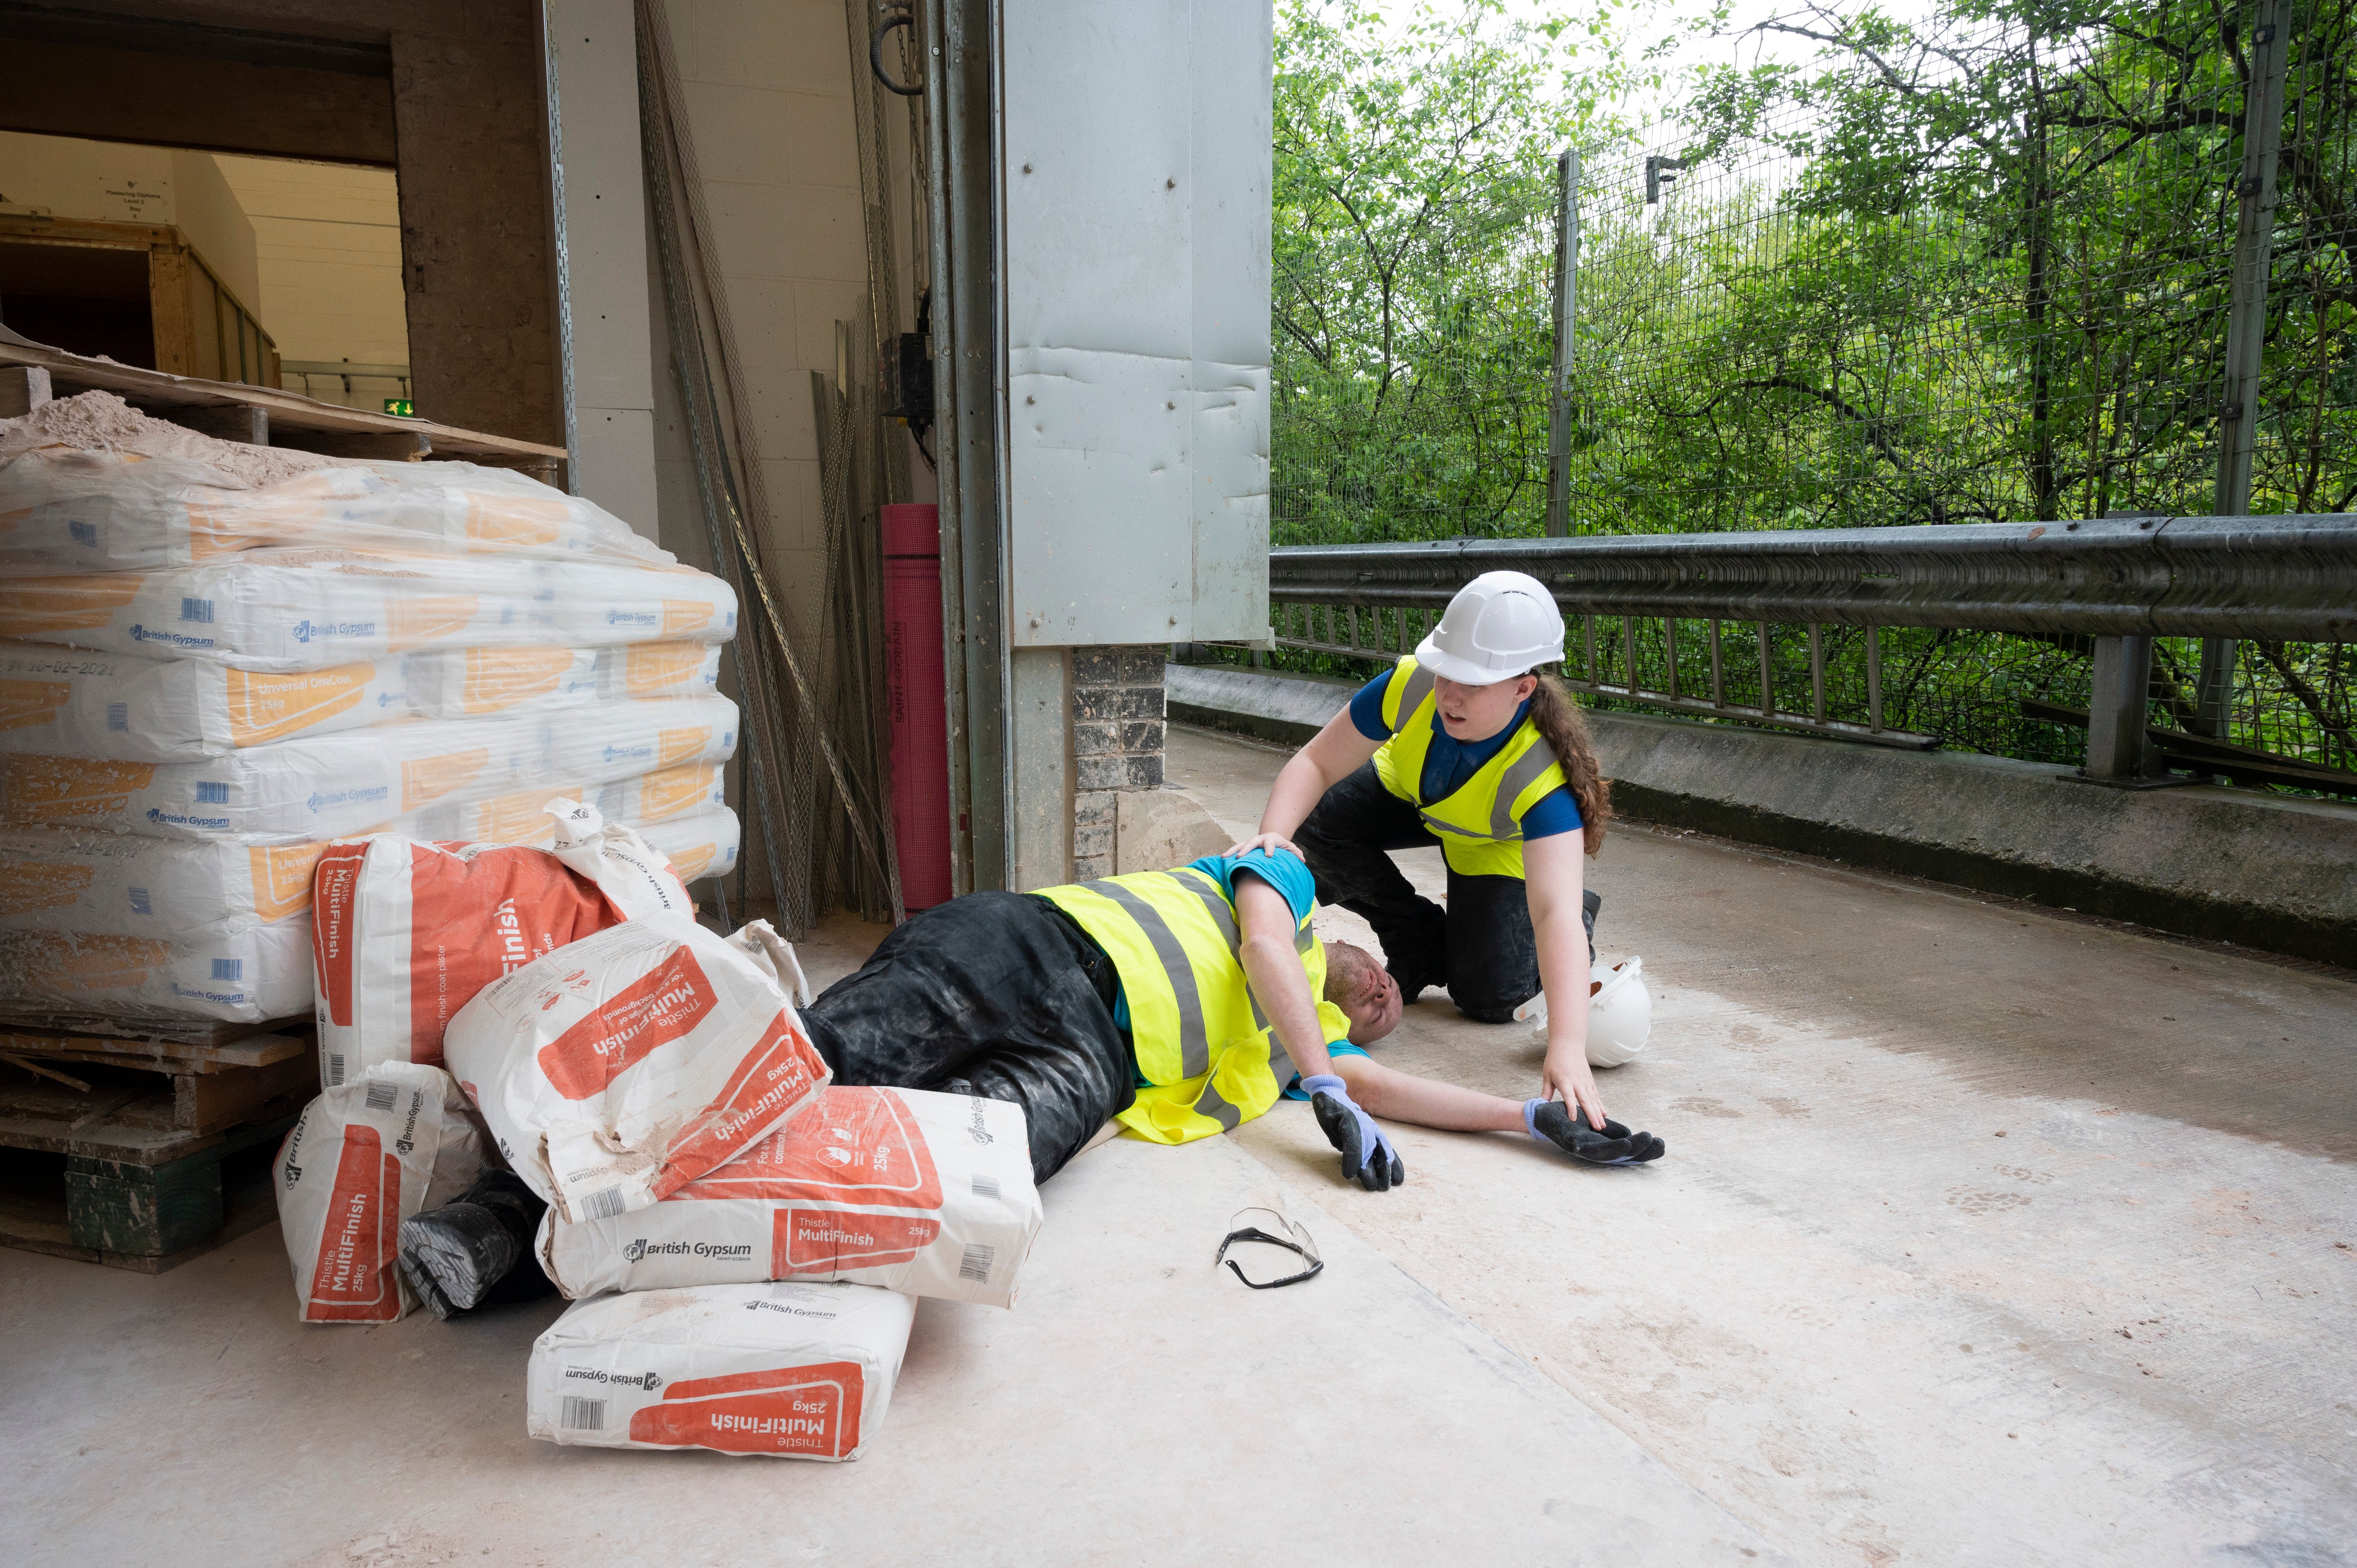 First aid for construction sites: Your blueprint for training confident first aiders | British Red Cross Training